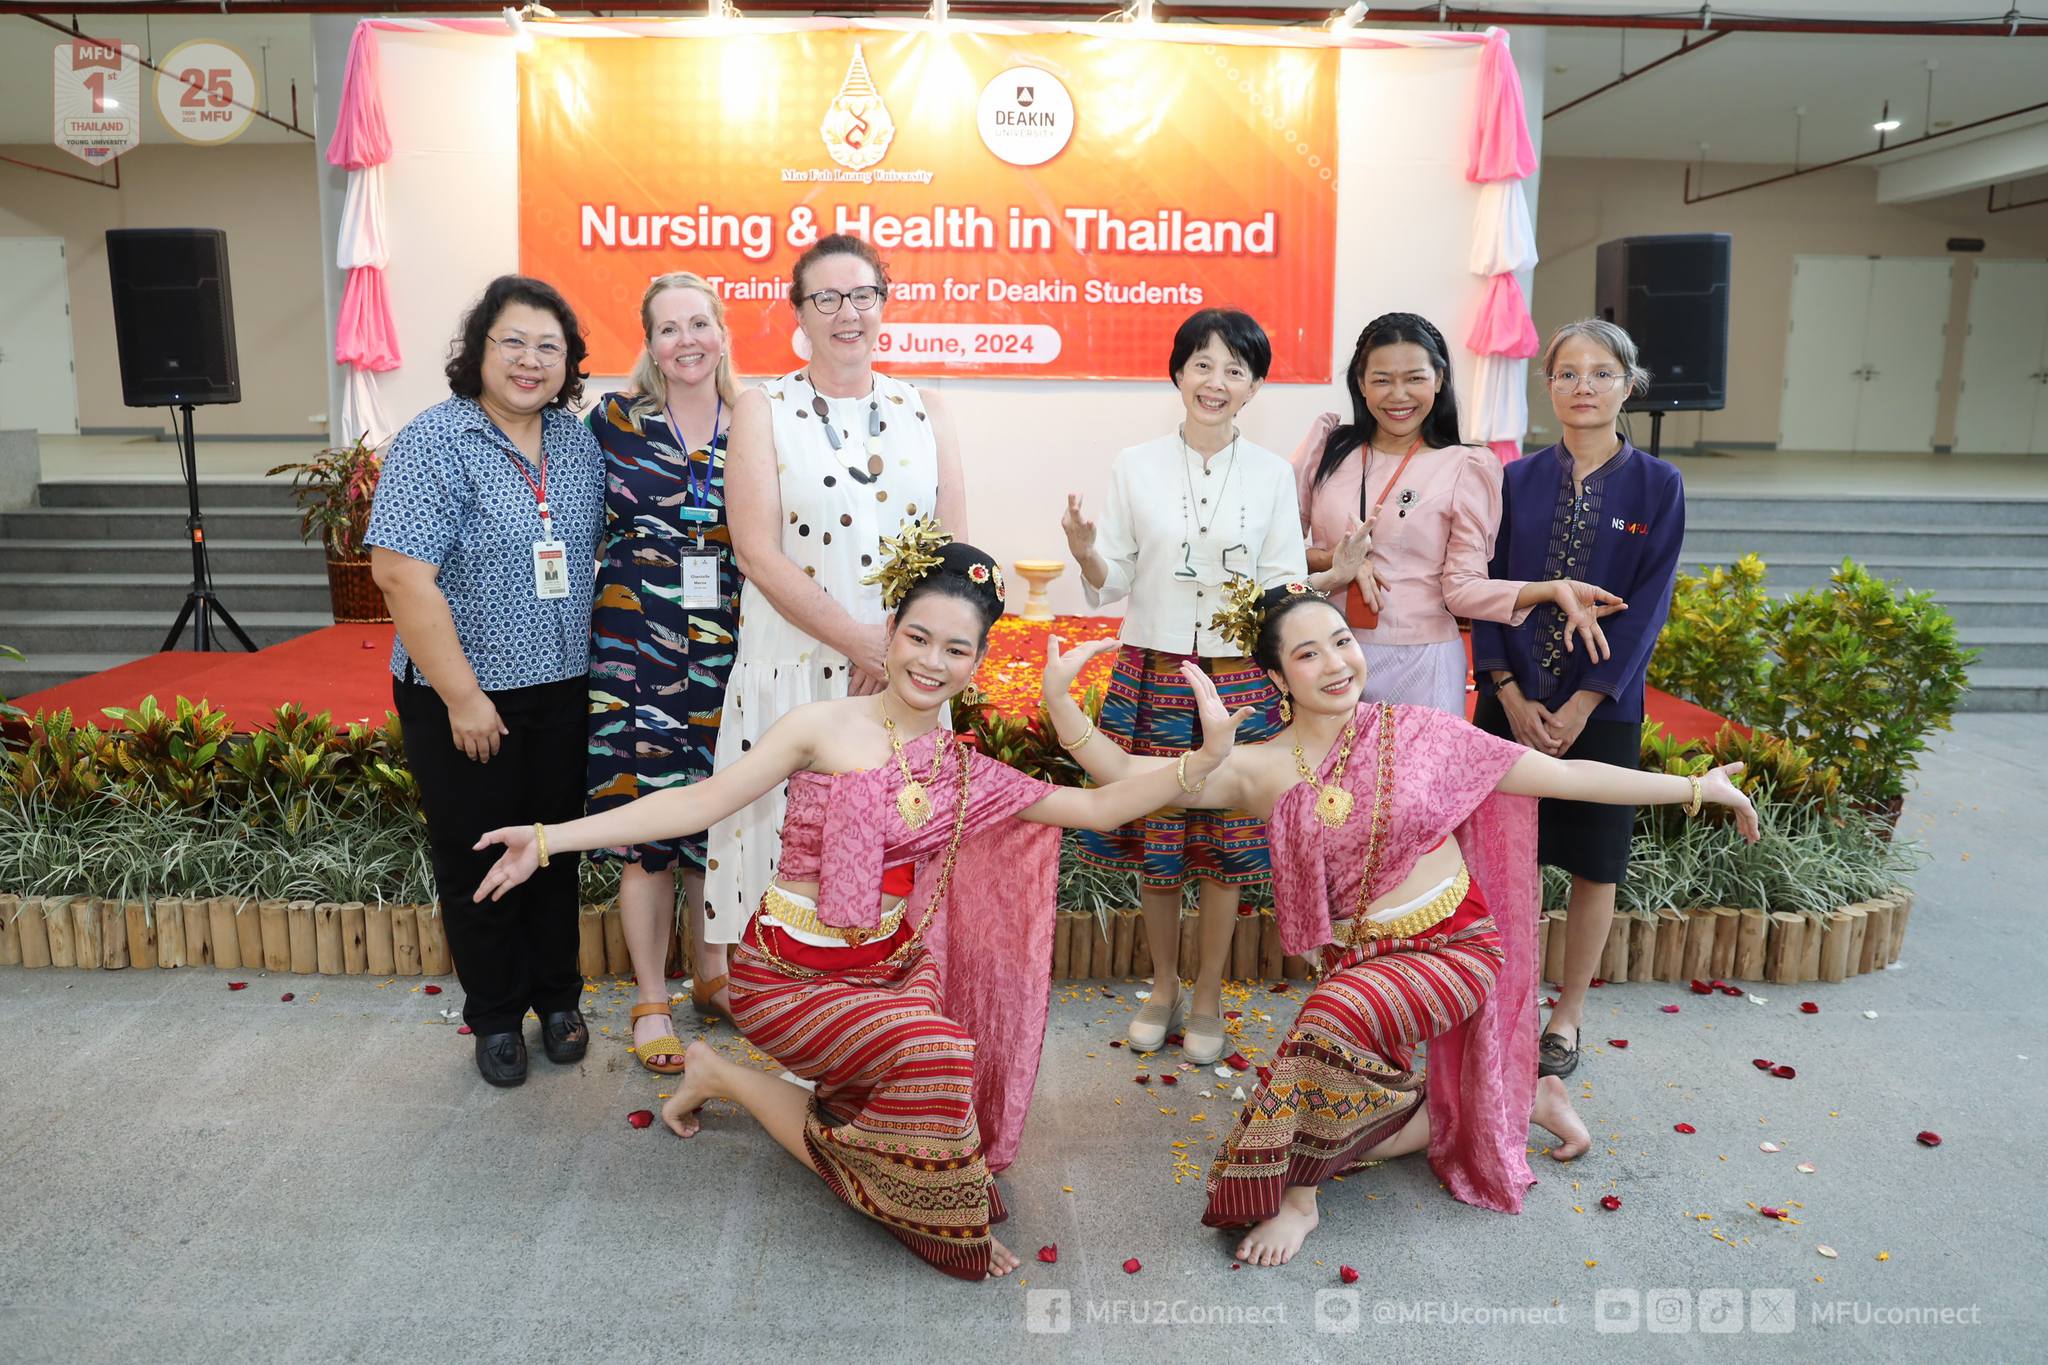 The School of Nursing, Mae Fah Luang University, held a reception on the evening of June 24, 2024, to welcome professors and nursing students from the School of Nursing and Midwifery, Deakin University, Australia.